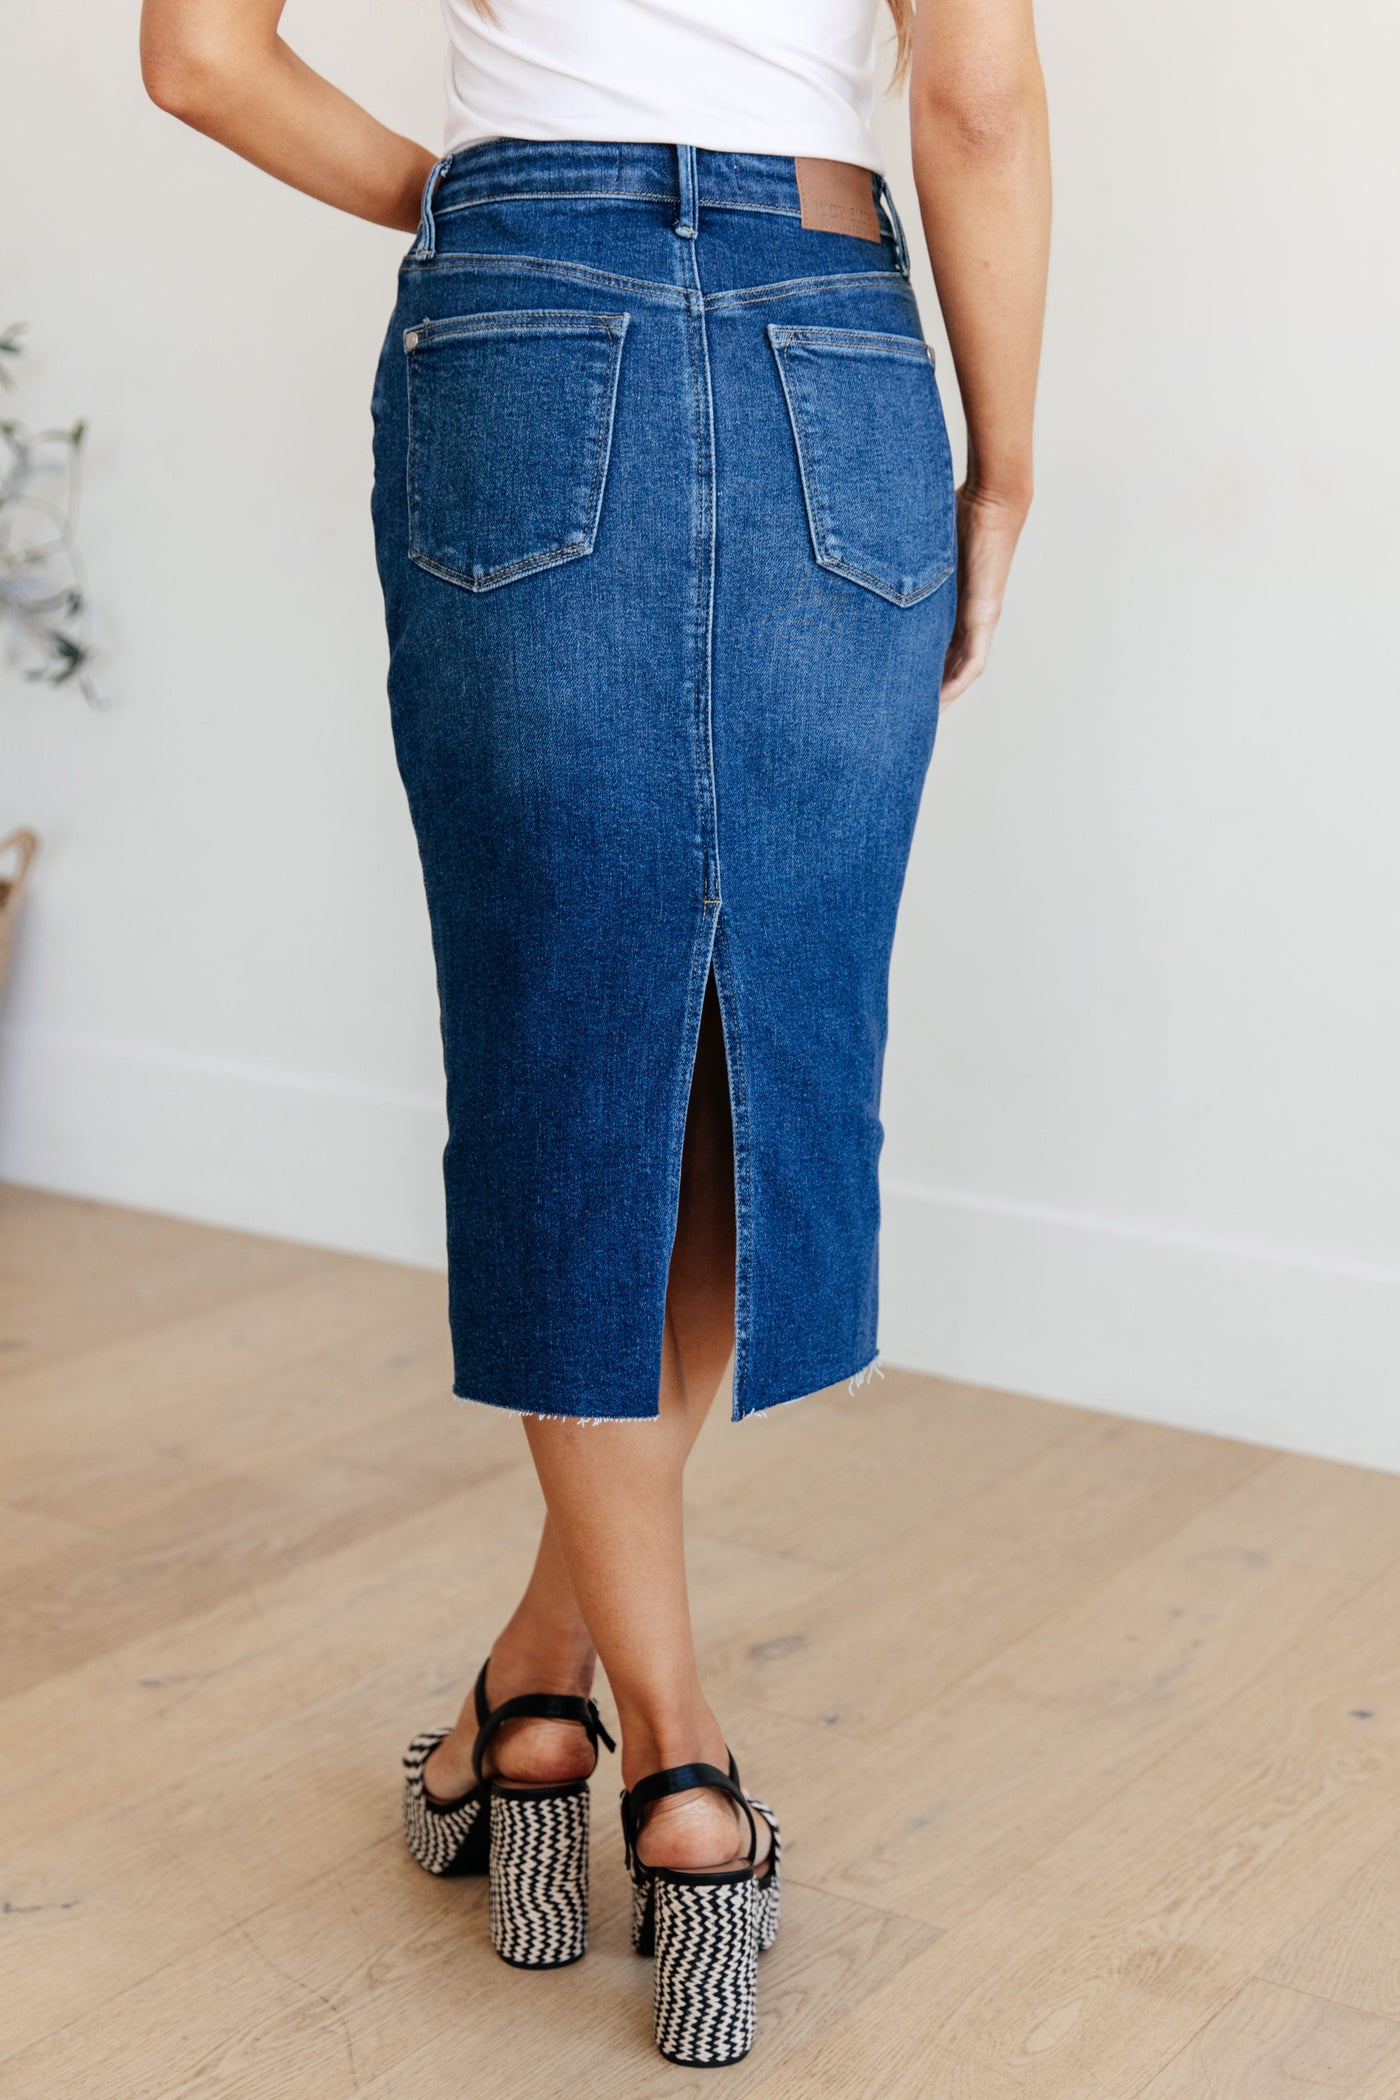 Marcy High Rise Denim Midi Skirt-Denim-Ave Shops-Market Street Nest, Fashionable Clothing, Shoes and Home Décor Located in Mabank, TX